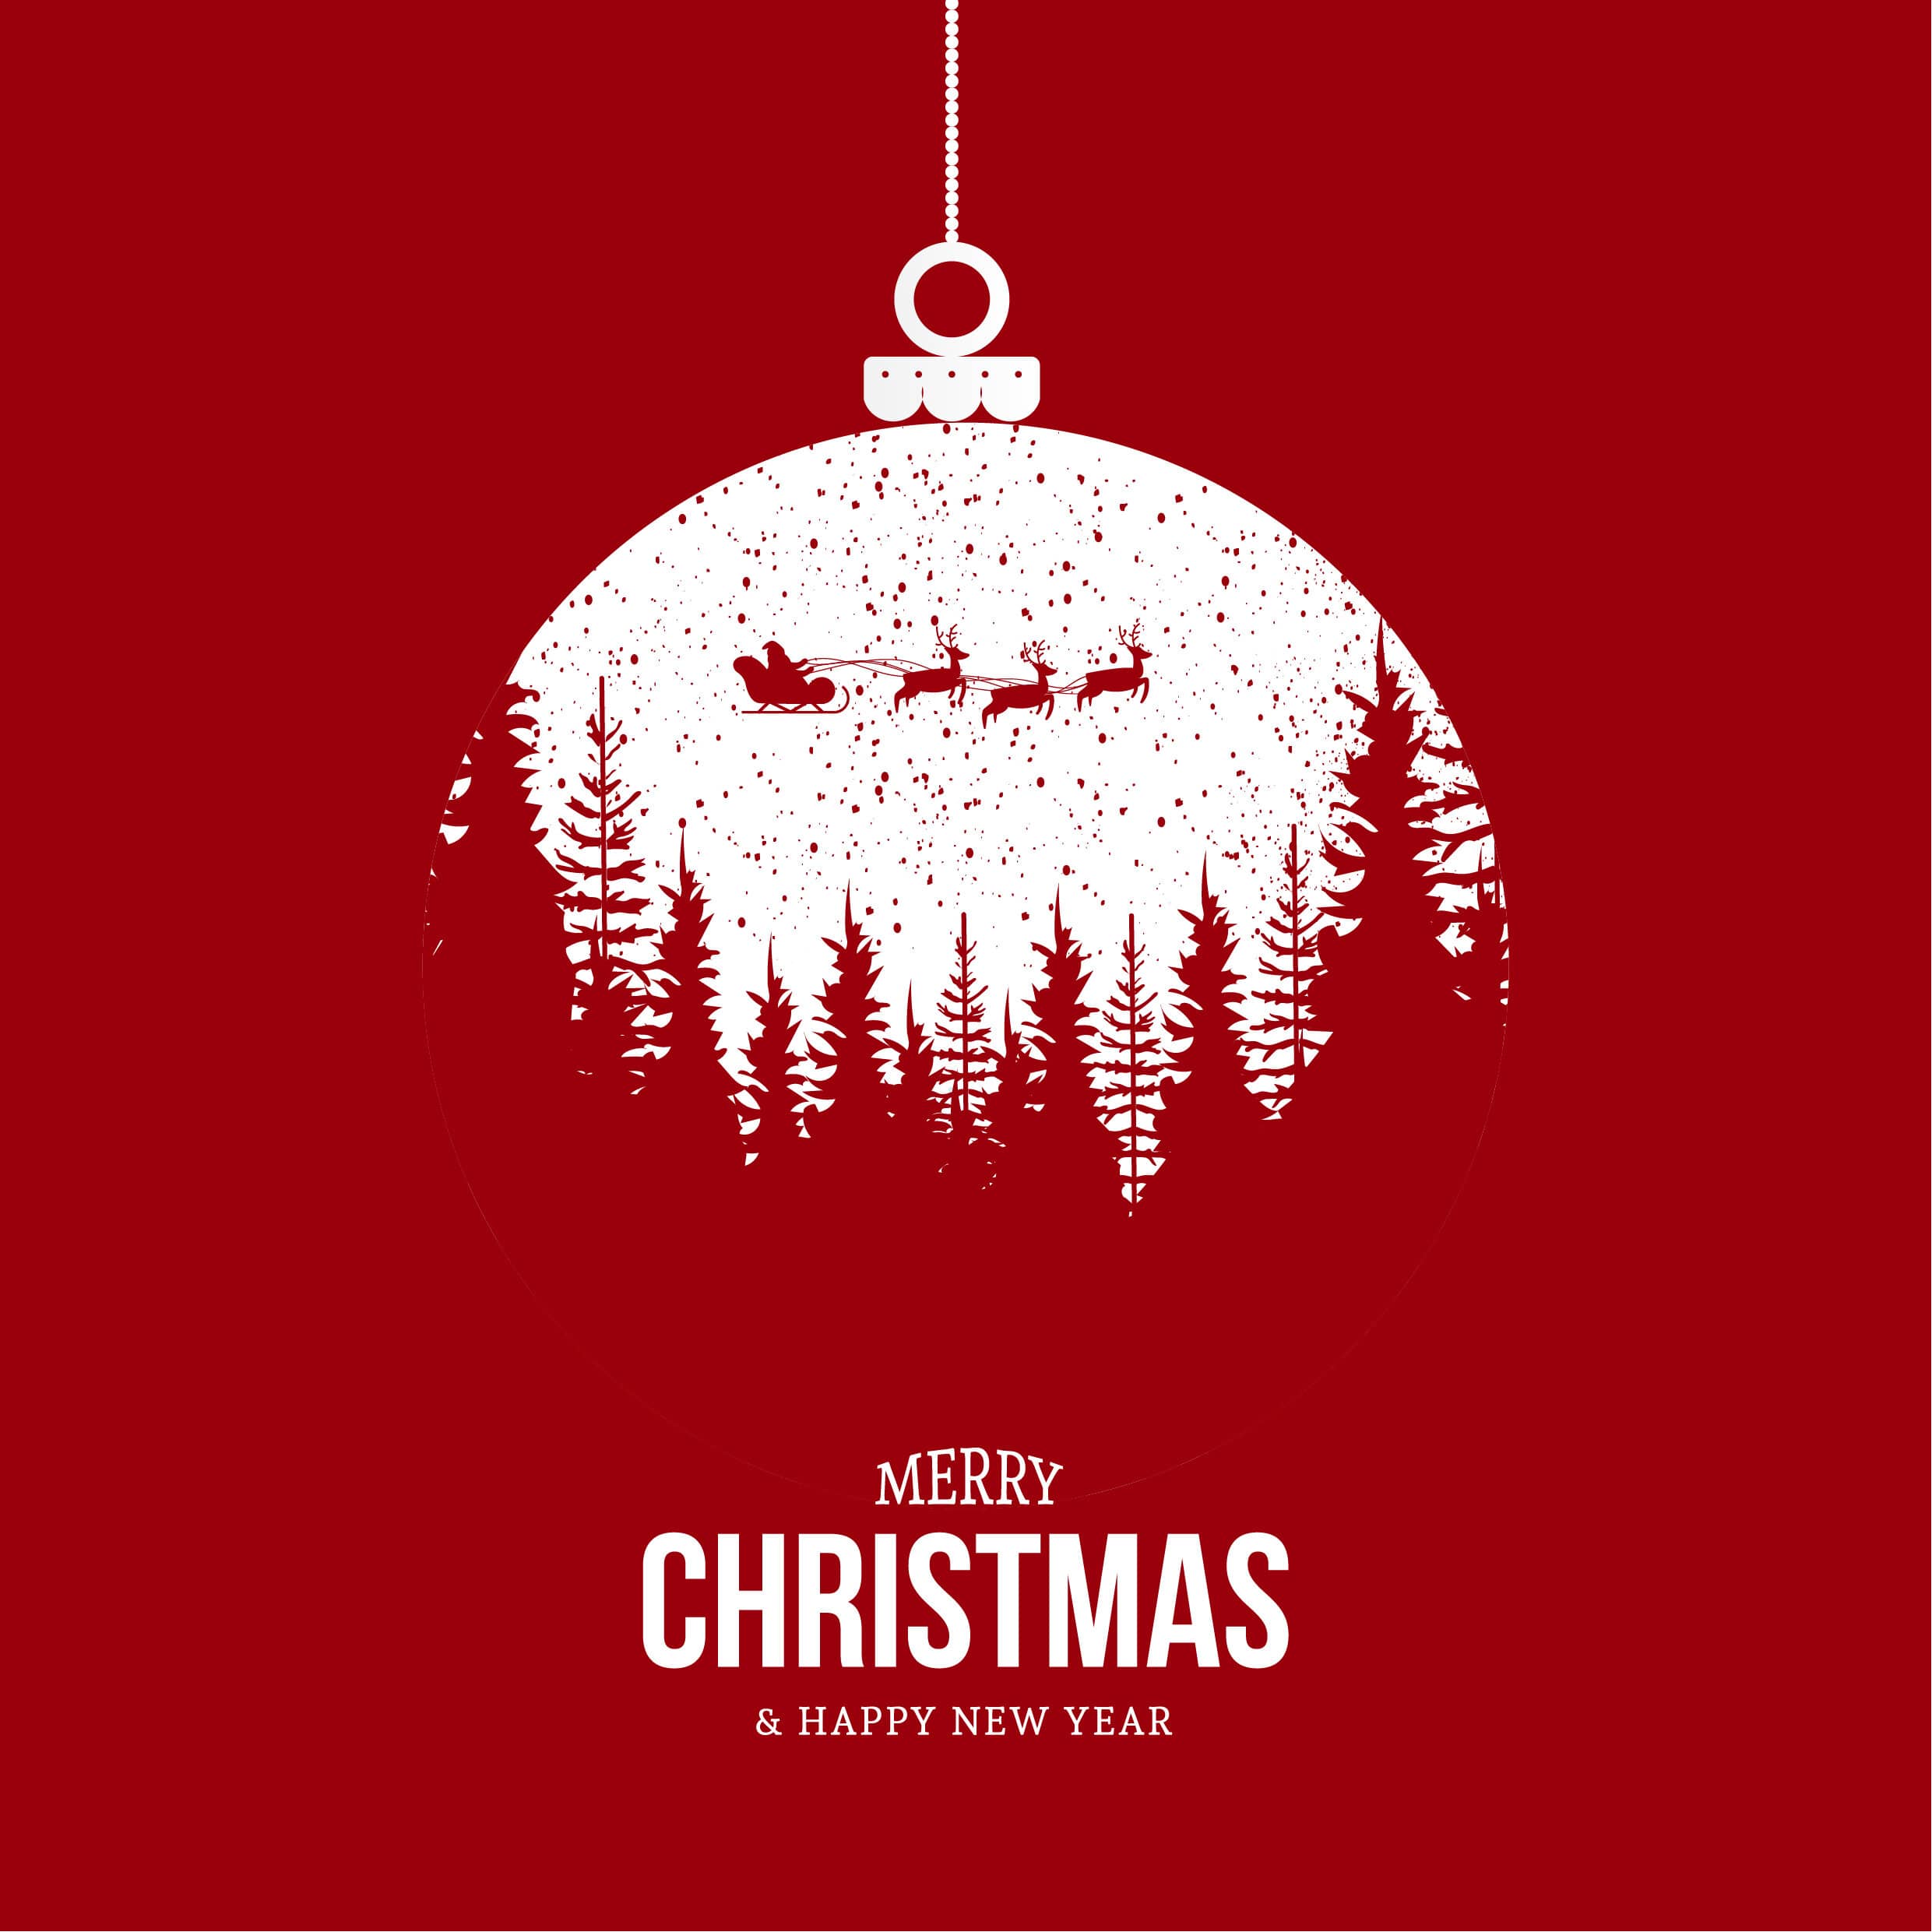 Merry Christmas Red Backgrounds Design preview image.